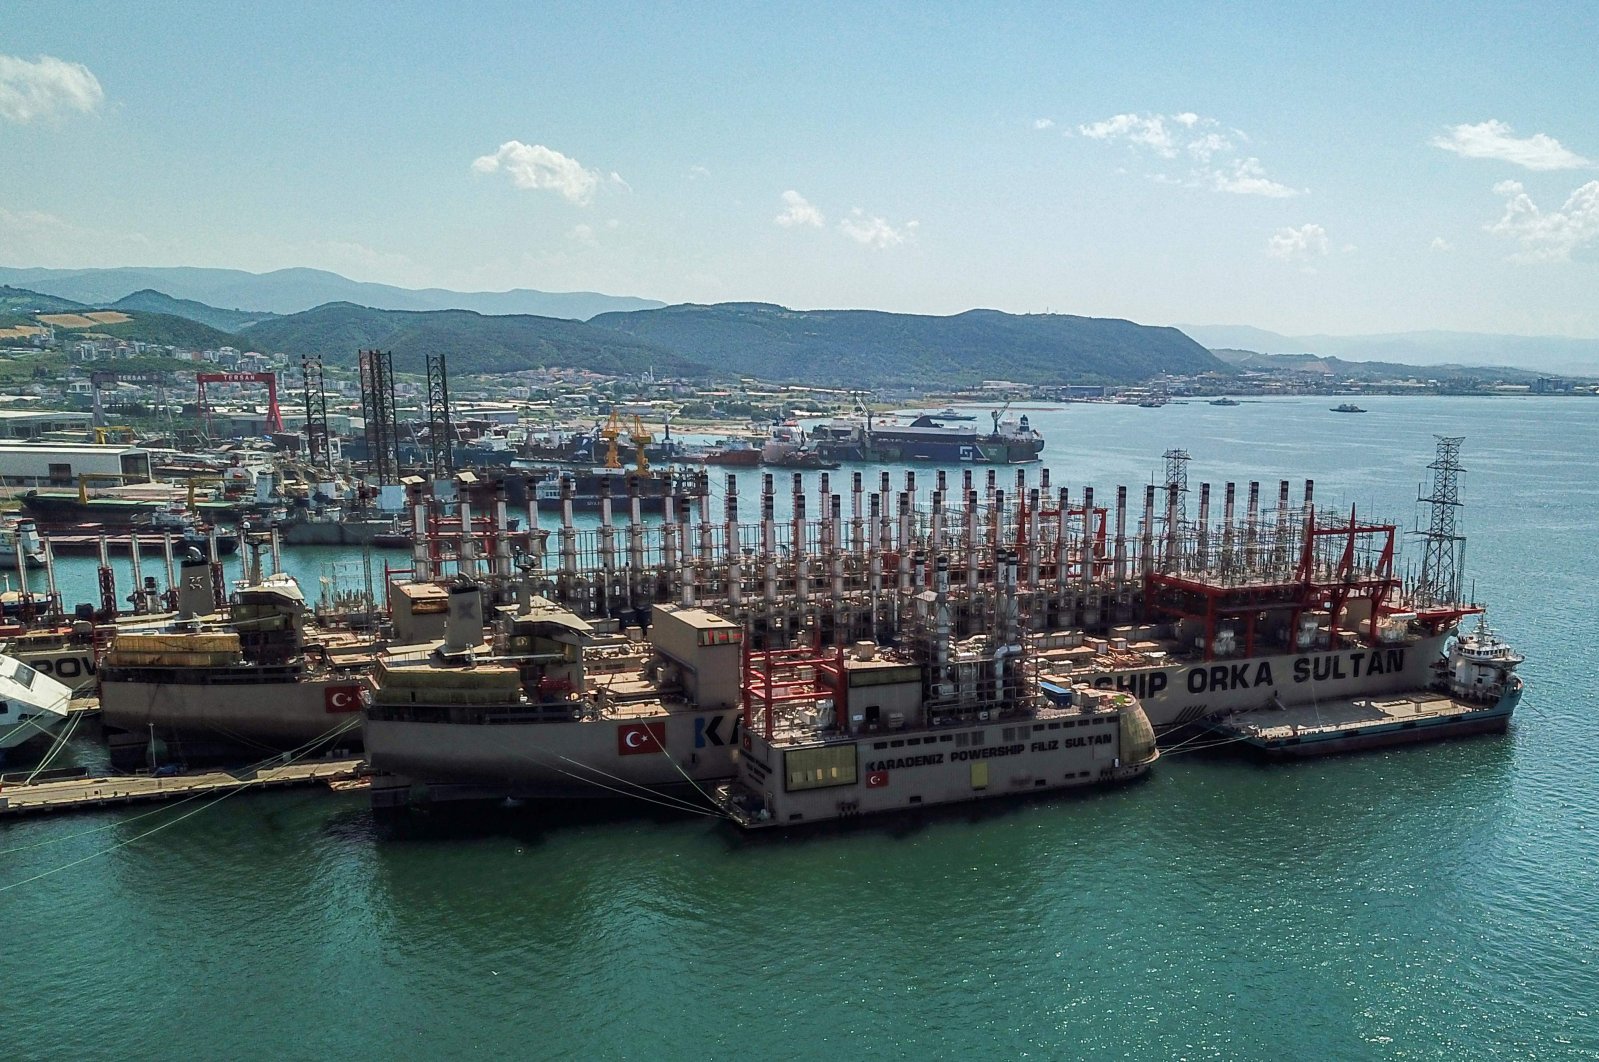 The powerships Orca Sultan (front) and Raif Bey (back) are seen docked in a shipyard in Altinova district, Yalova, Turkey, June 16, 2020. (AFP Photo)